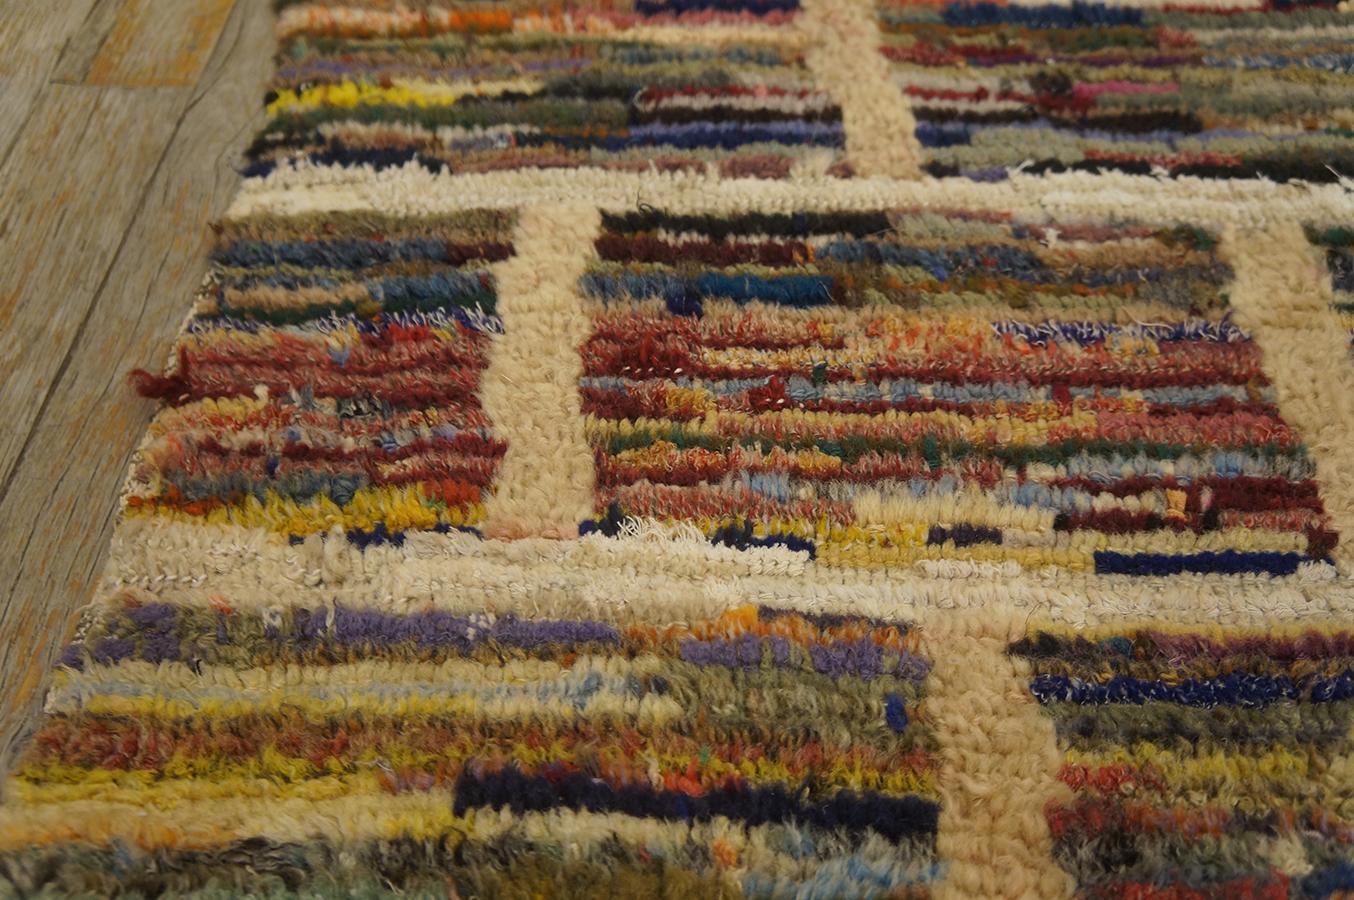 Mid-20th Century 1930s American Hooked Rug ( 3'3